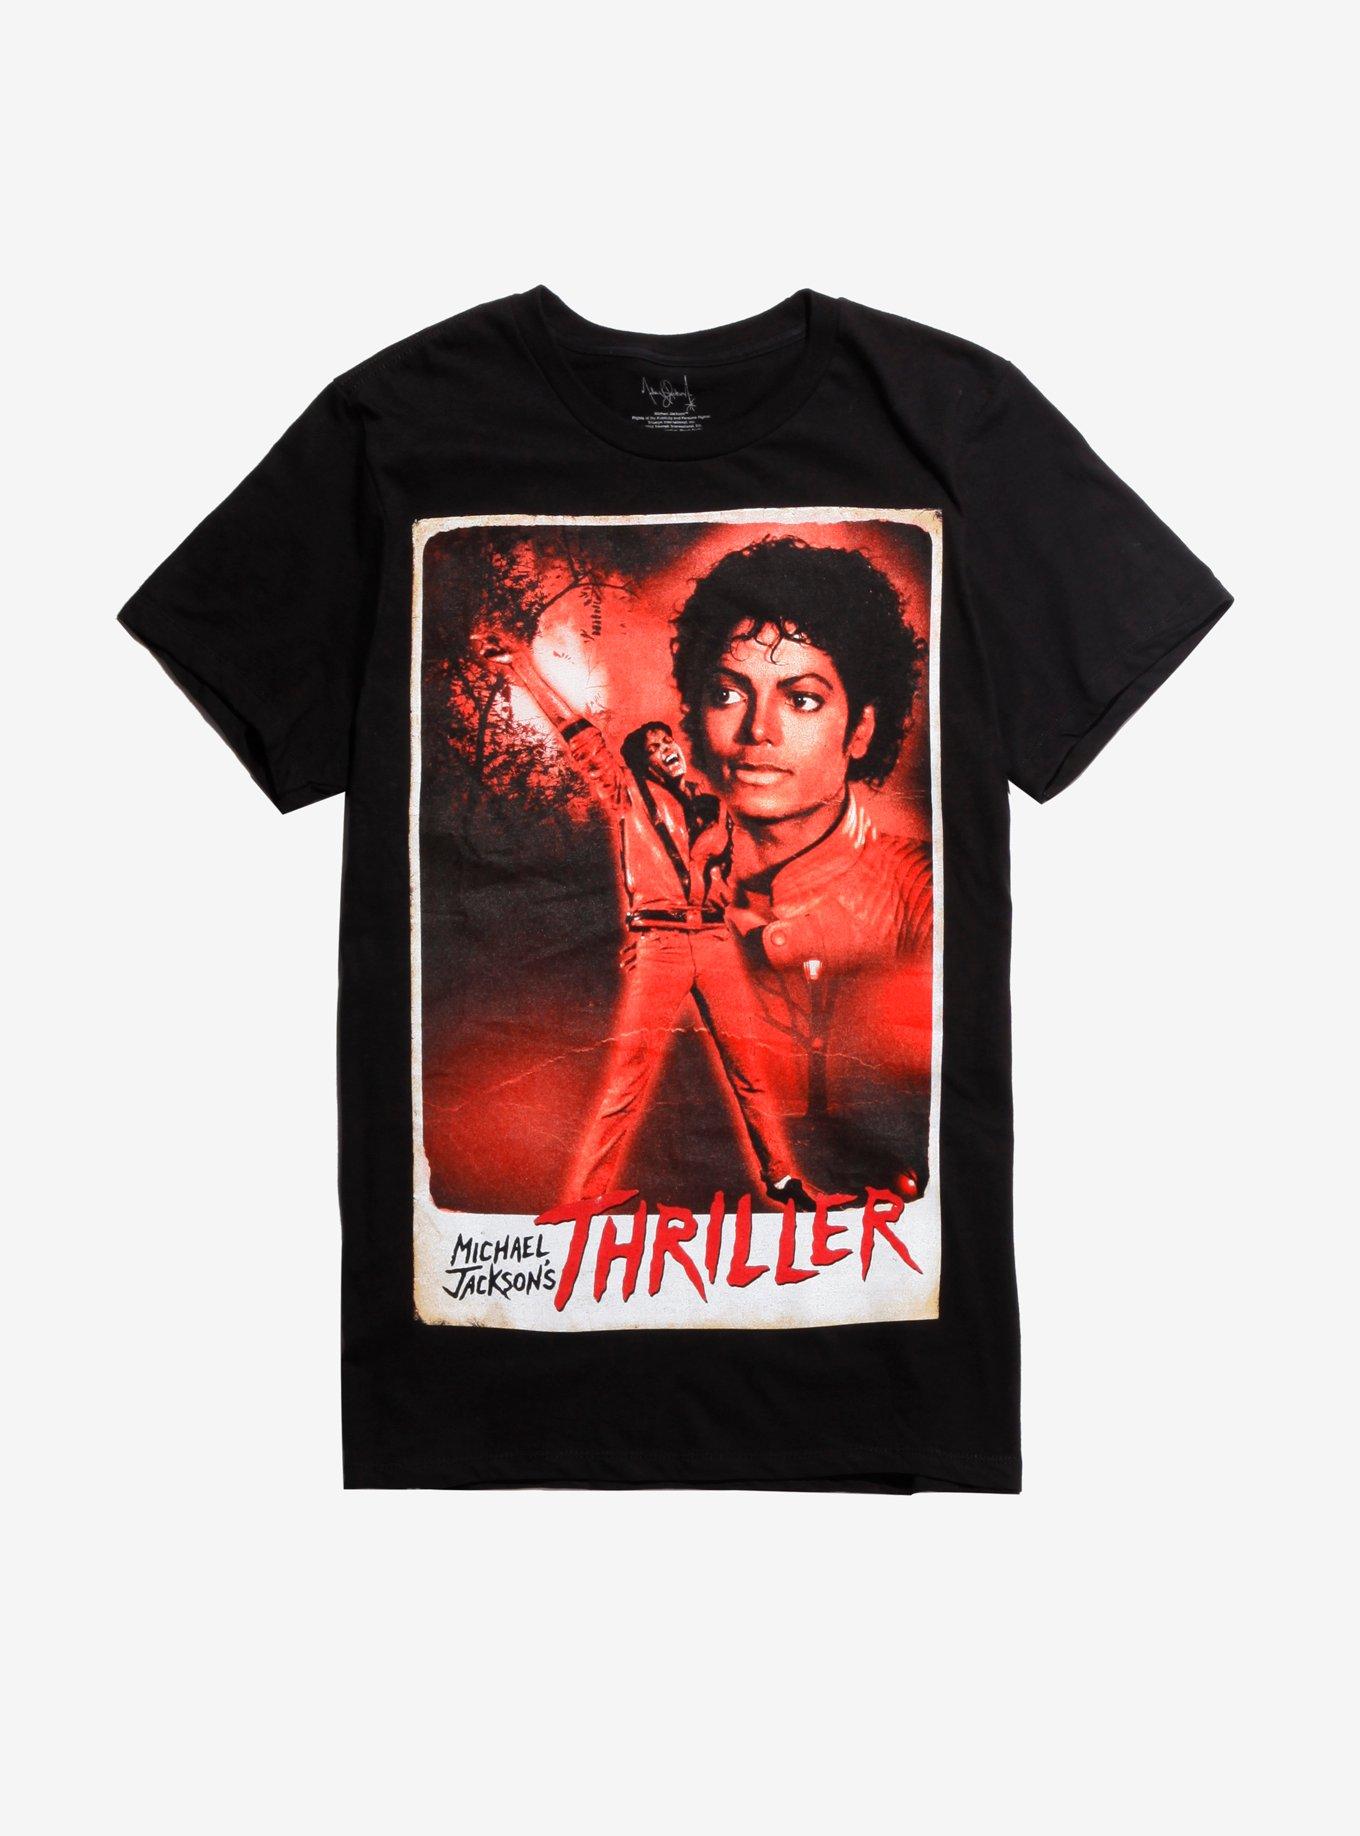 Thriller 40 Limited Quantity Merch Available In MJ Official Store